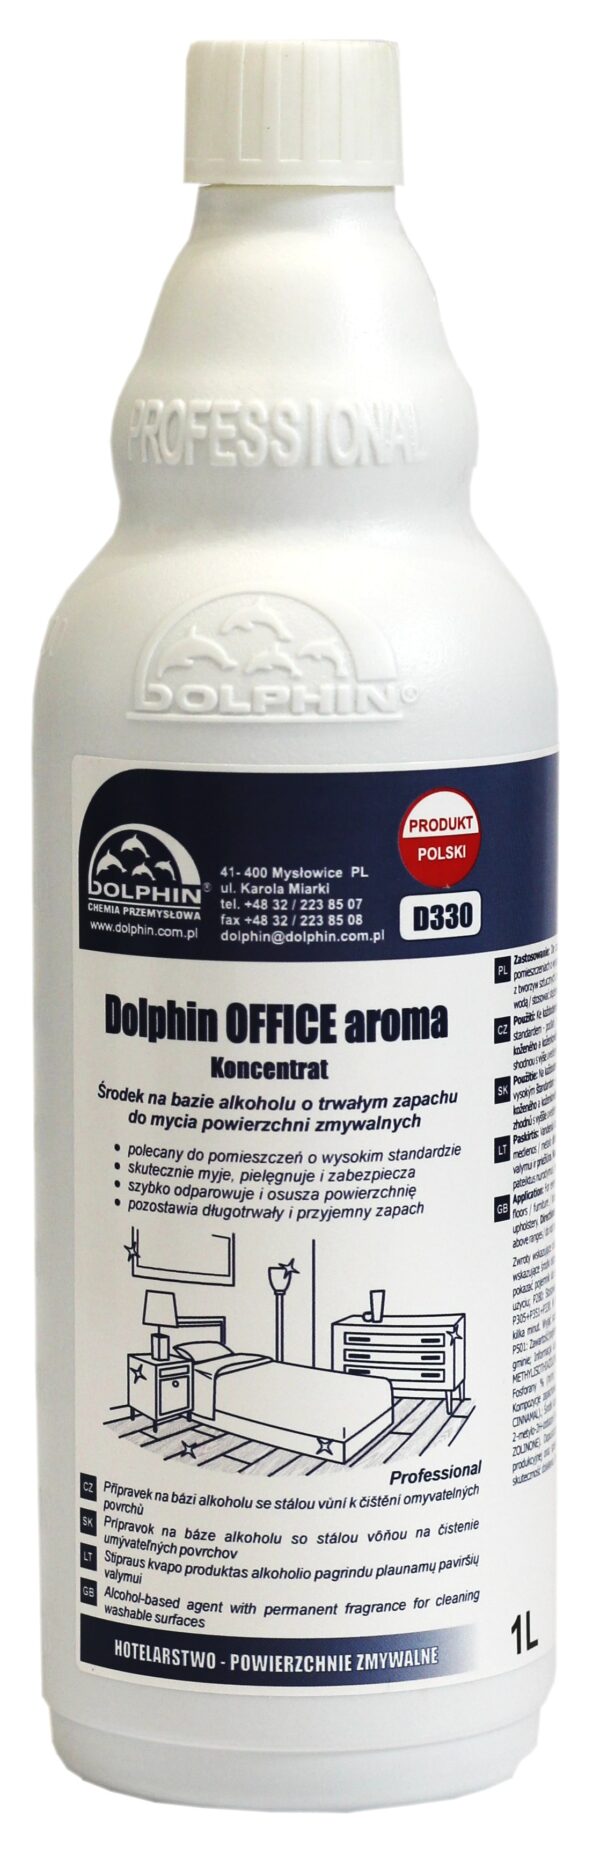 DOLPHIN D330 OFFICE aroma 1L (12/360)